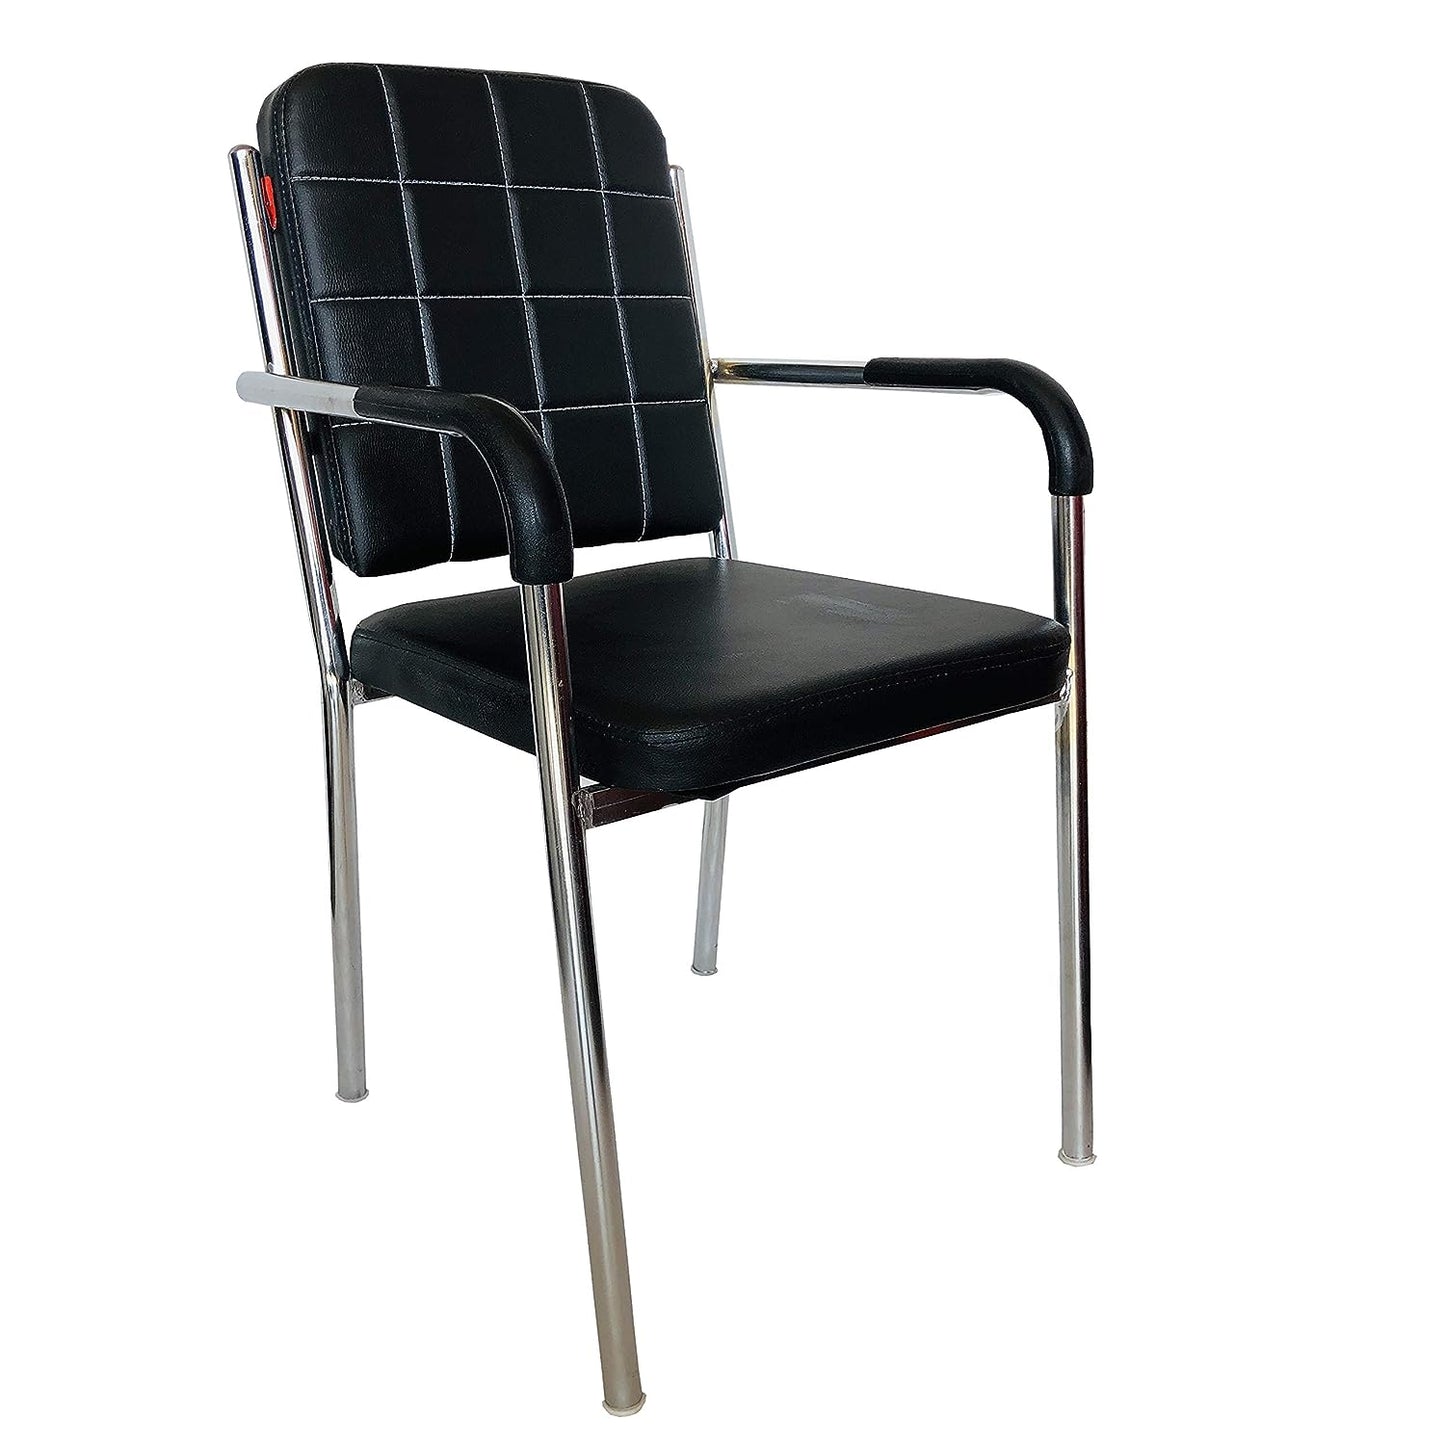 Bowzar Office Chair Visitor Chair with arm Rest with Steel Frame and cushoined seat Back Chair Without Wheels Black